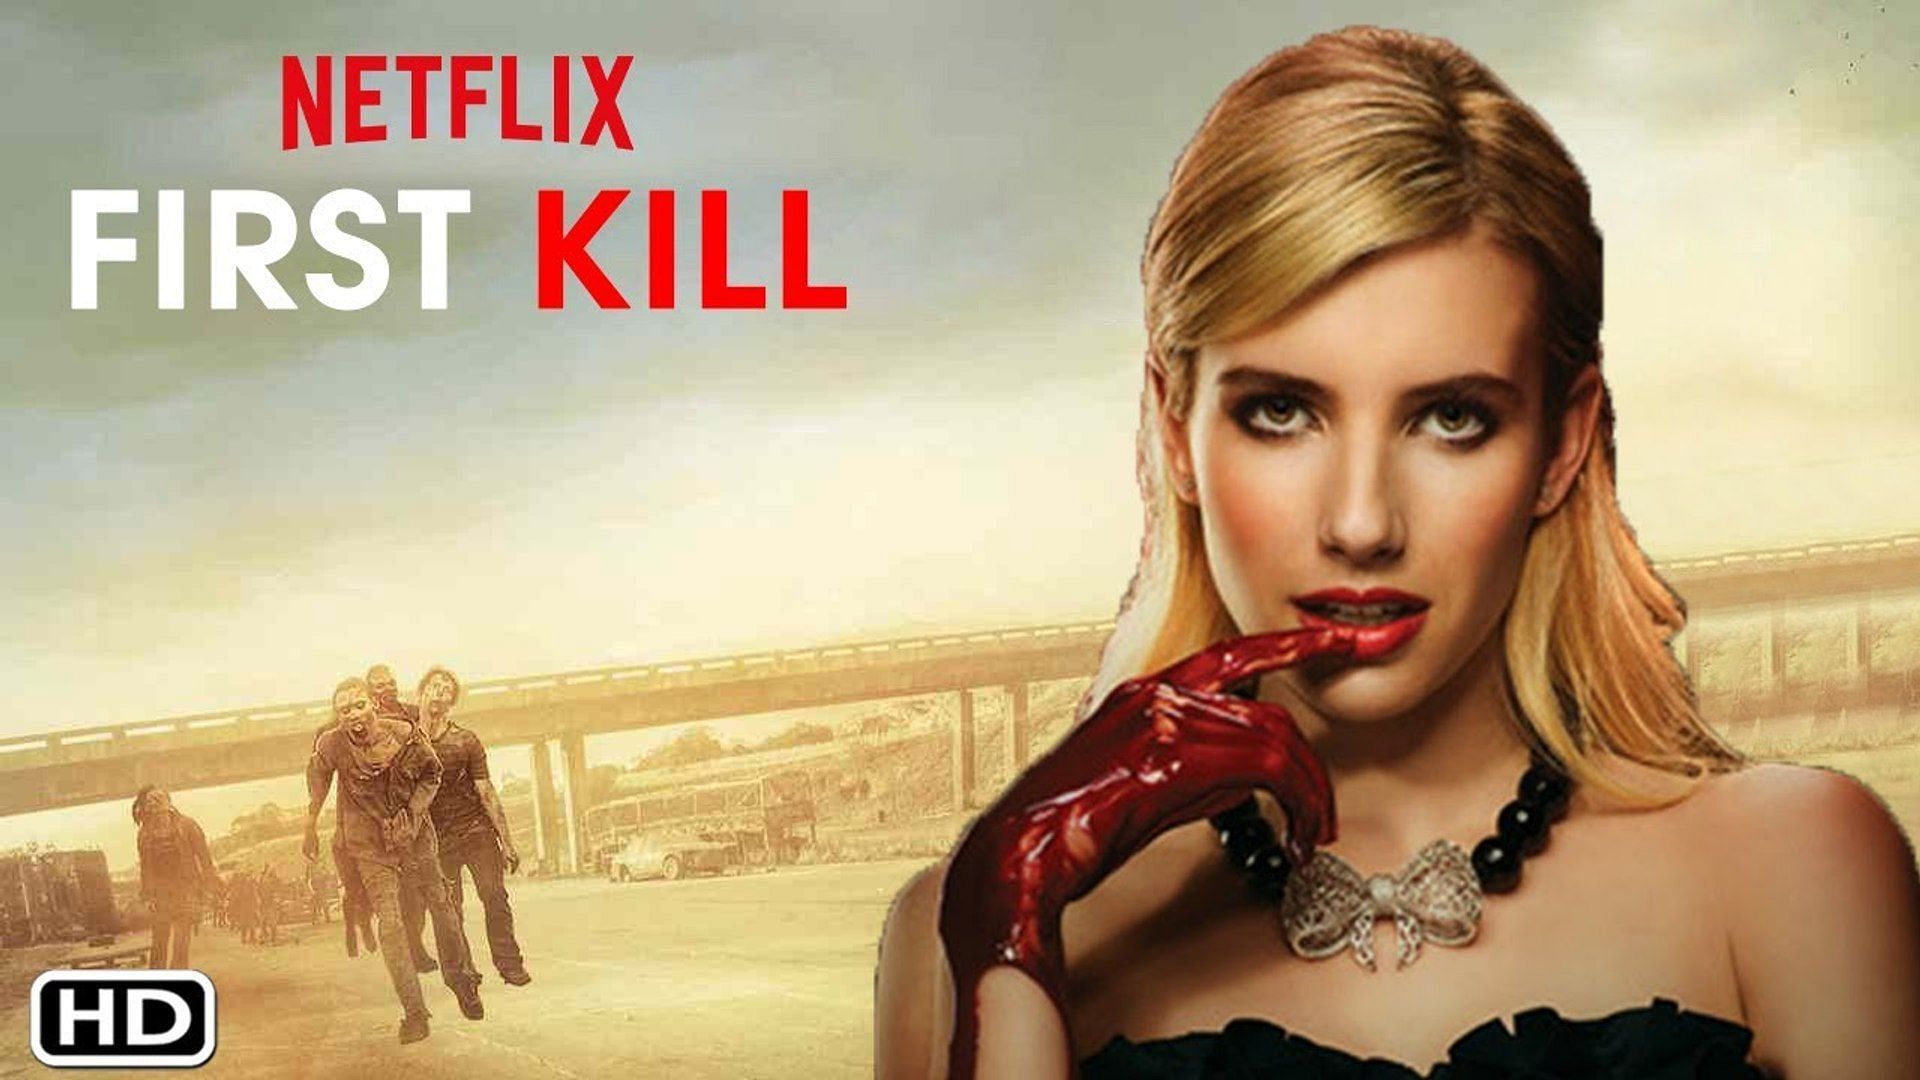 The official poster for First Kill (Image via Netflix)